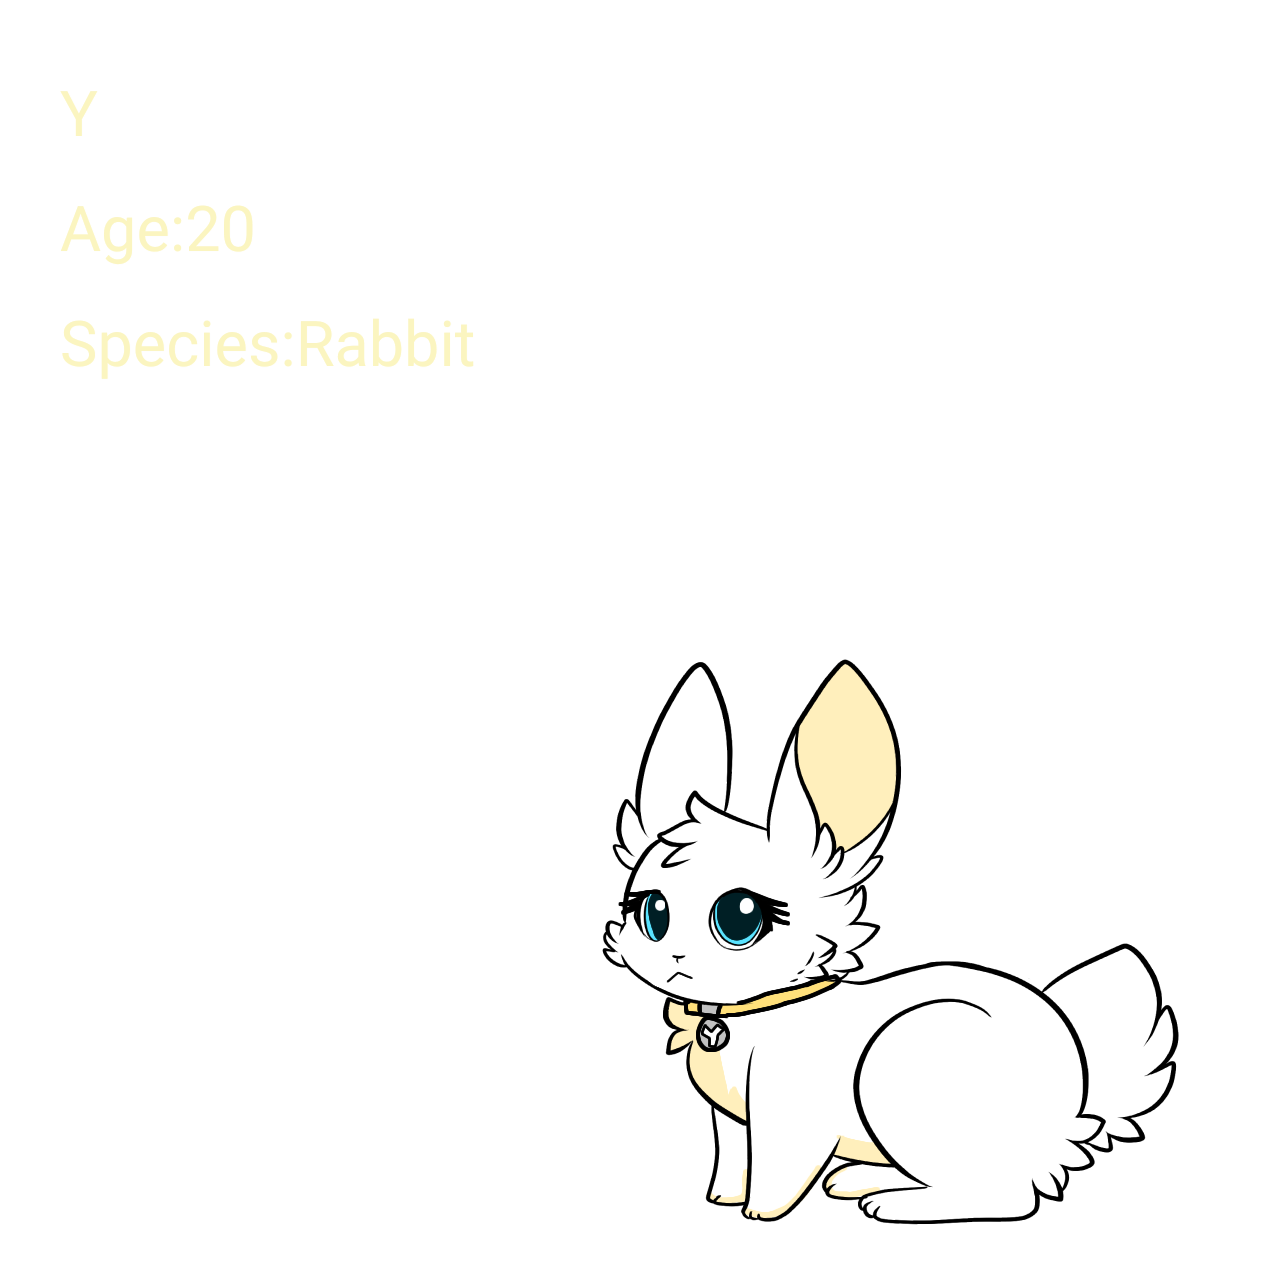 Alphabet Lore pet AU) Baby N The Chinchilla by SparkyAnimate1205